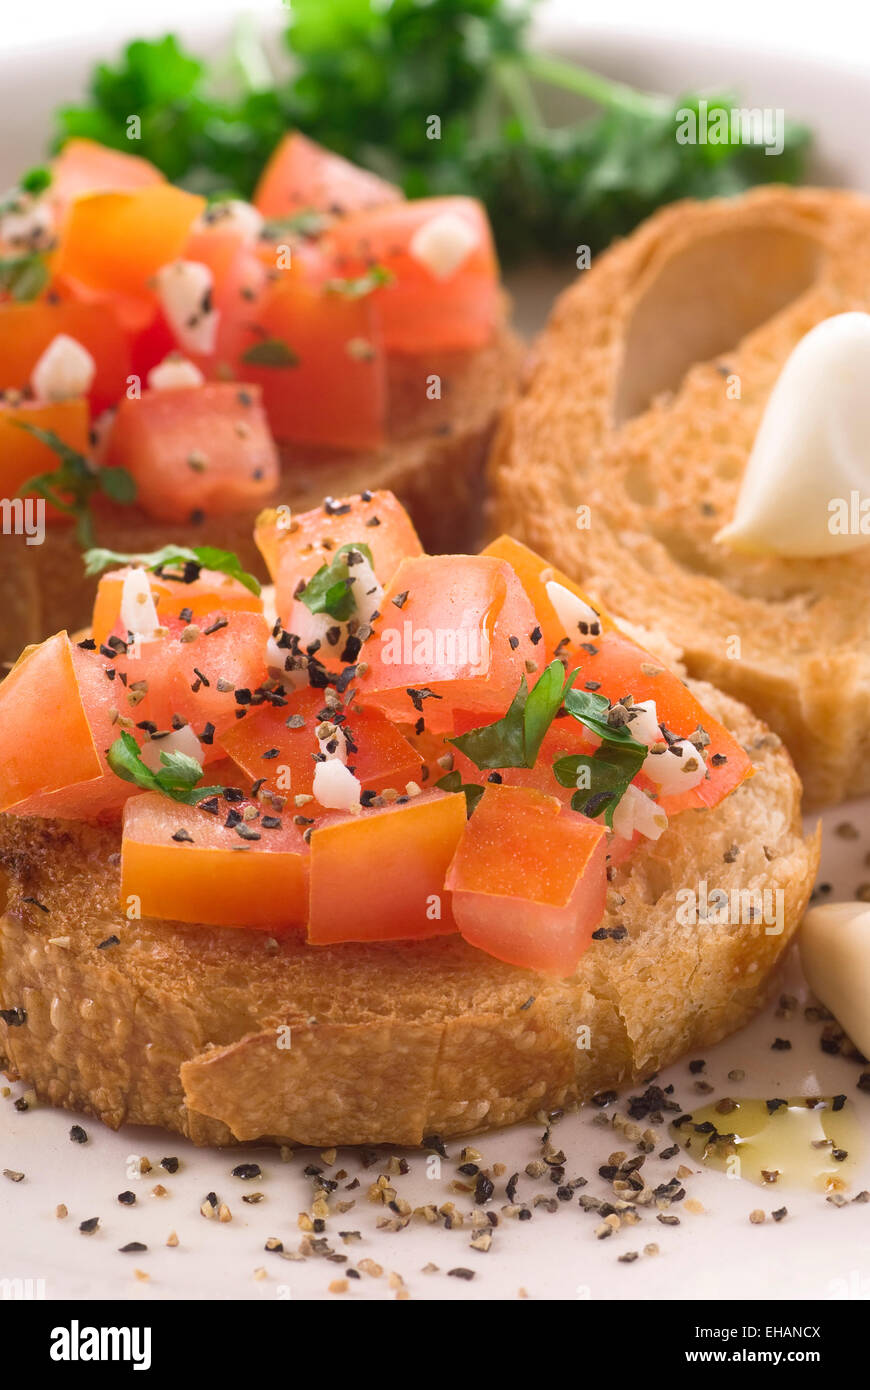 Bruschetta with tomato, olive oil, parsley, pepper and garlic. Stock Photo